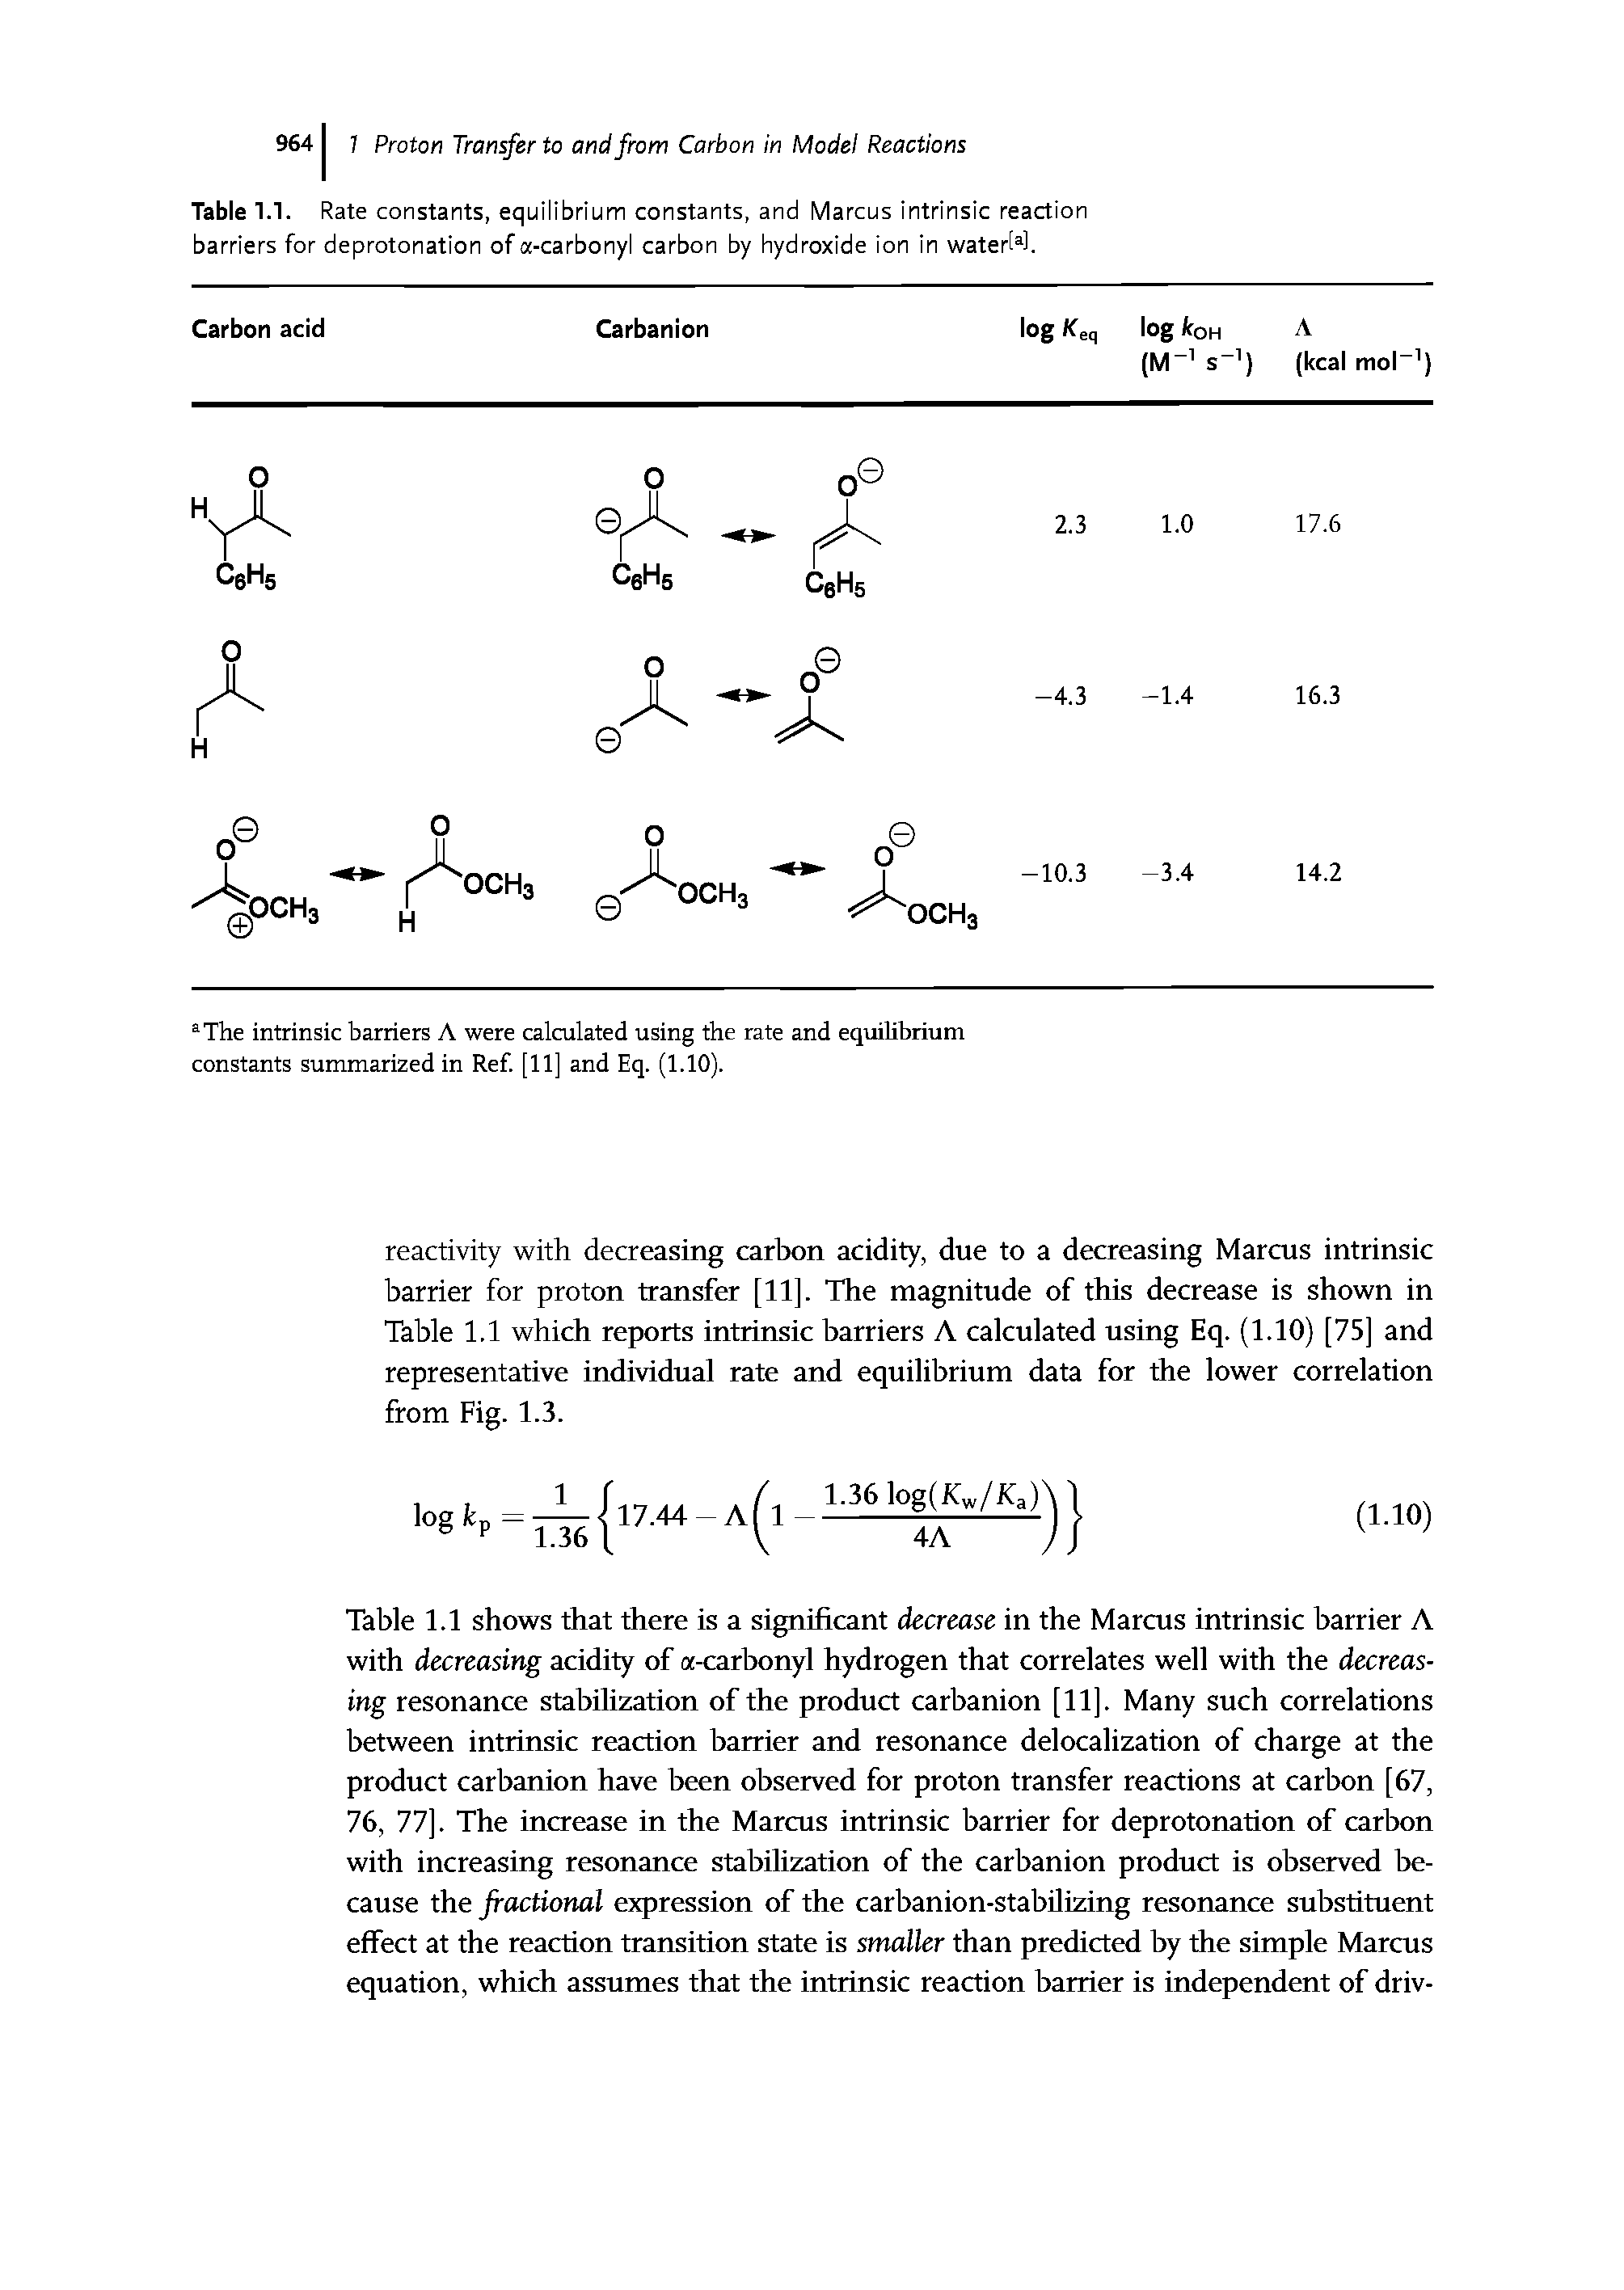 Table 1.1. Rate constants, equilibrium constants, and Marcus intrinsic reaction barriers for deprotonation of a-carbonyl carbon by hydroxide ion in wateK l.